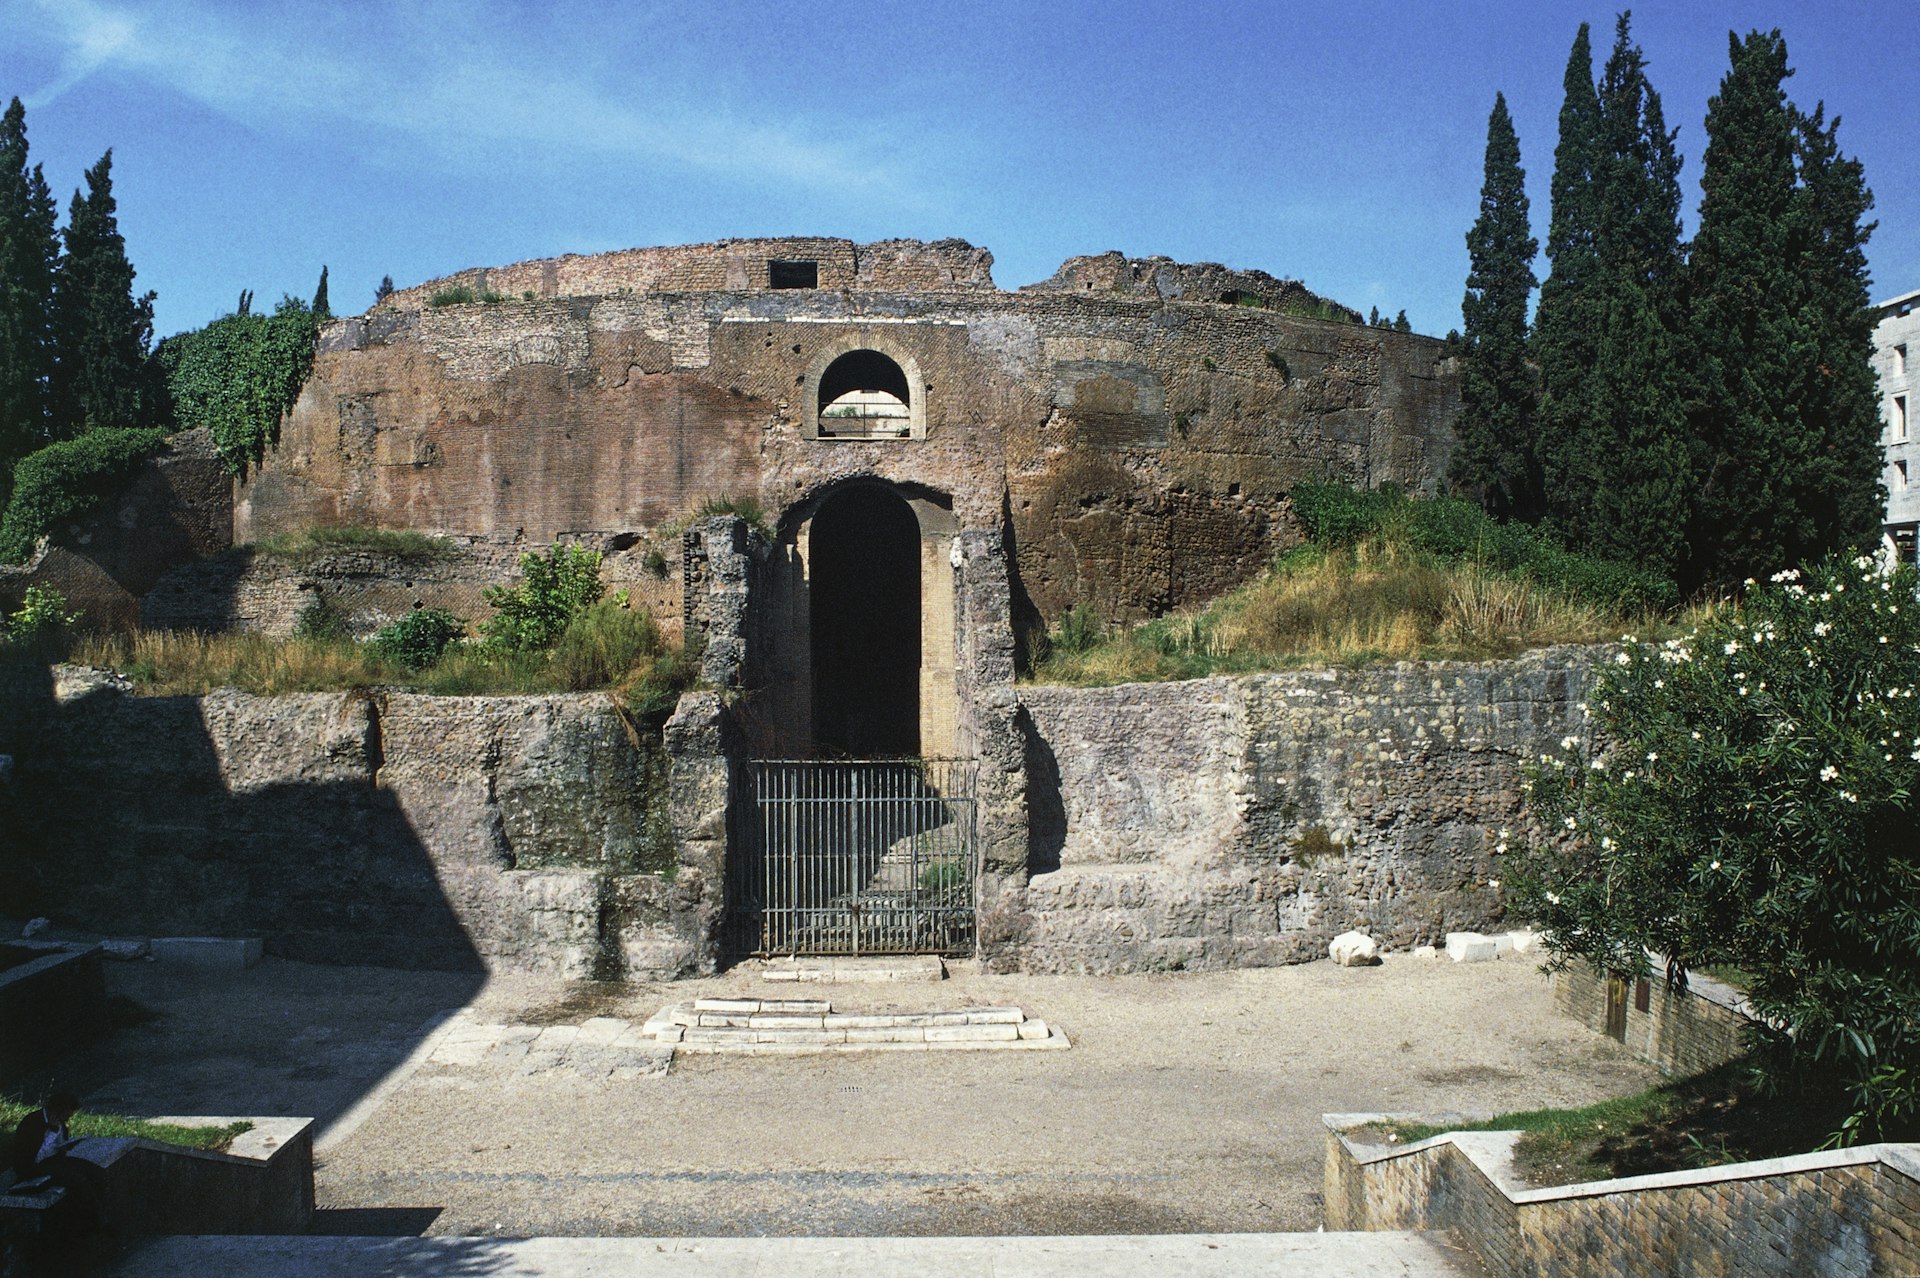 A picture of the entrance to the Mausoleo before restorations